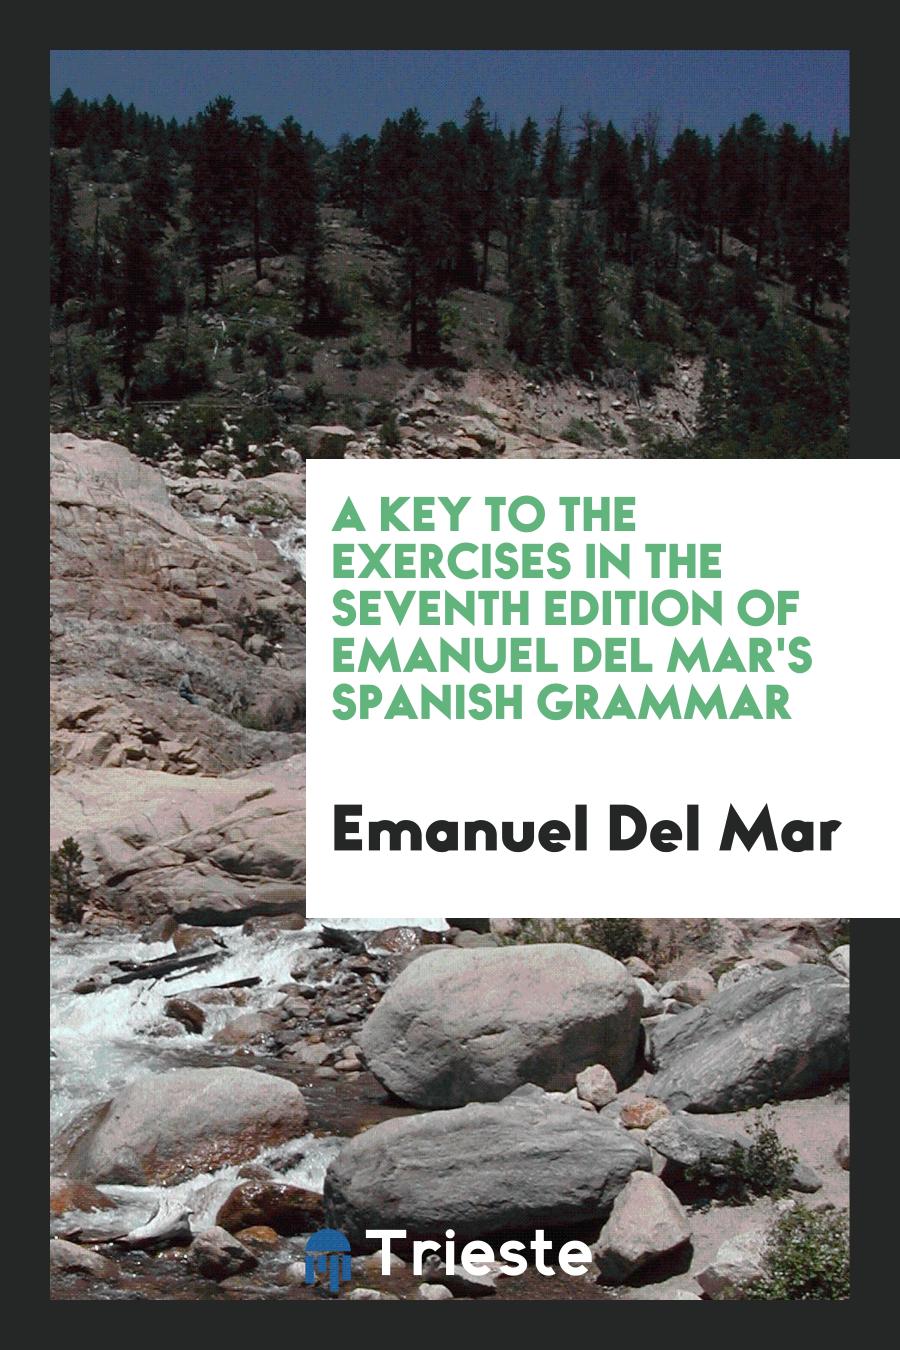 A key to the exercises in the seventh edition of emanuel del mar's spanish grammar